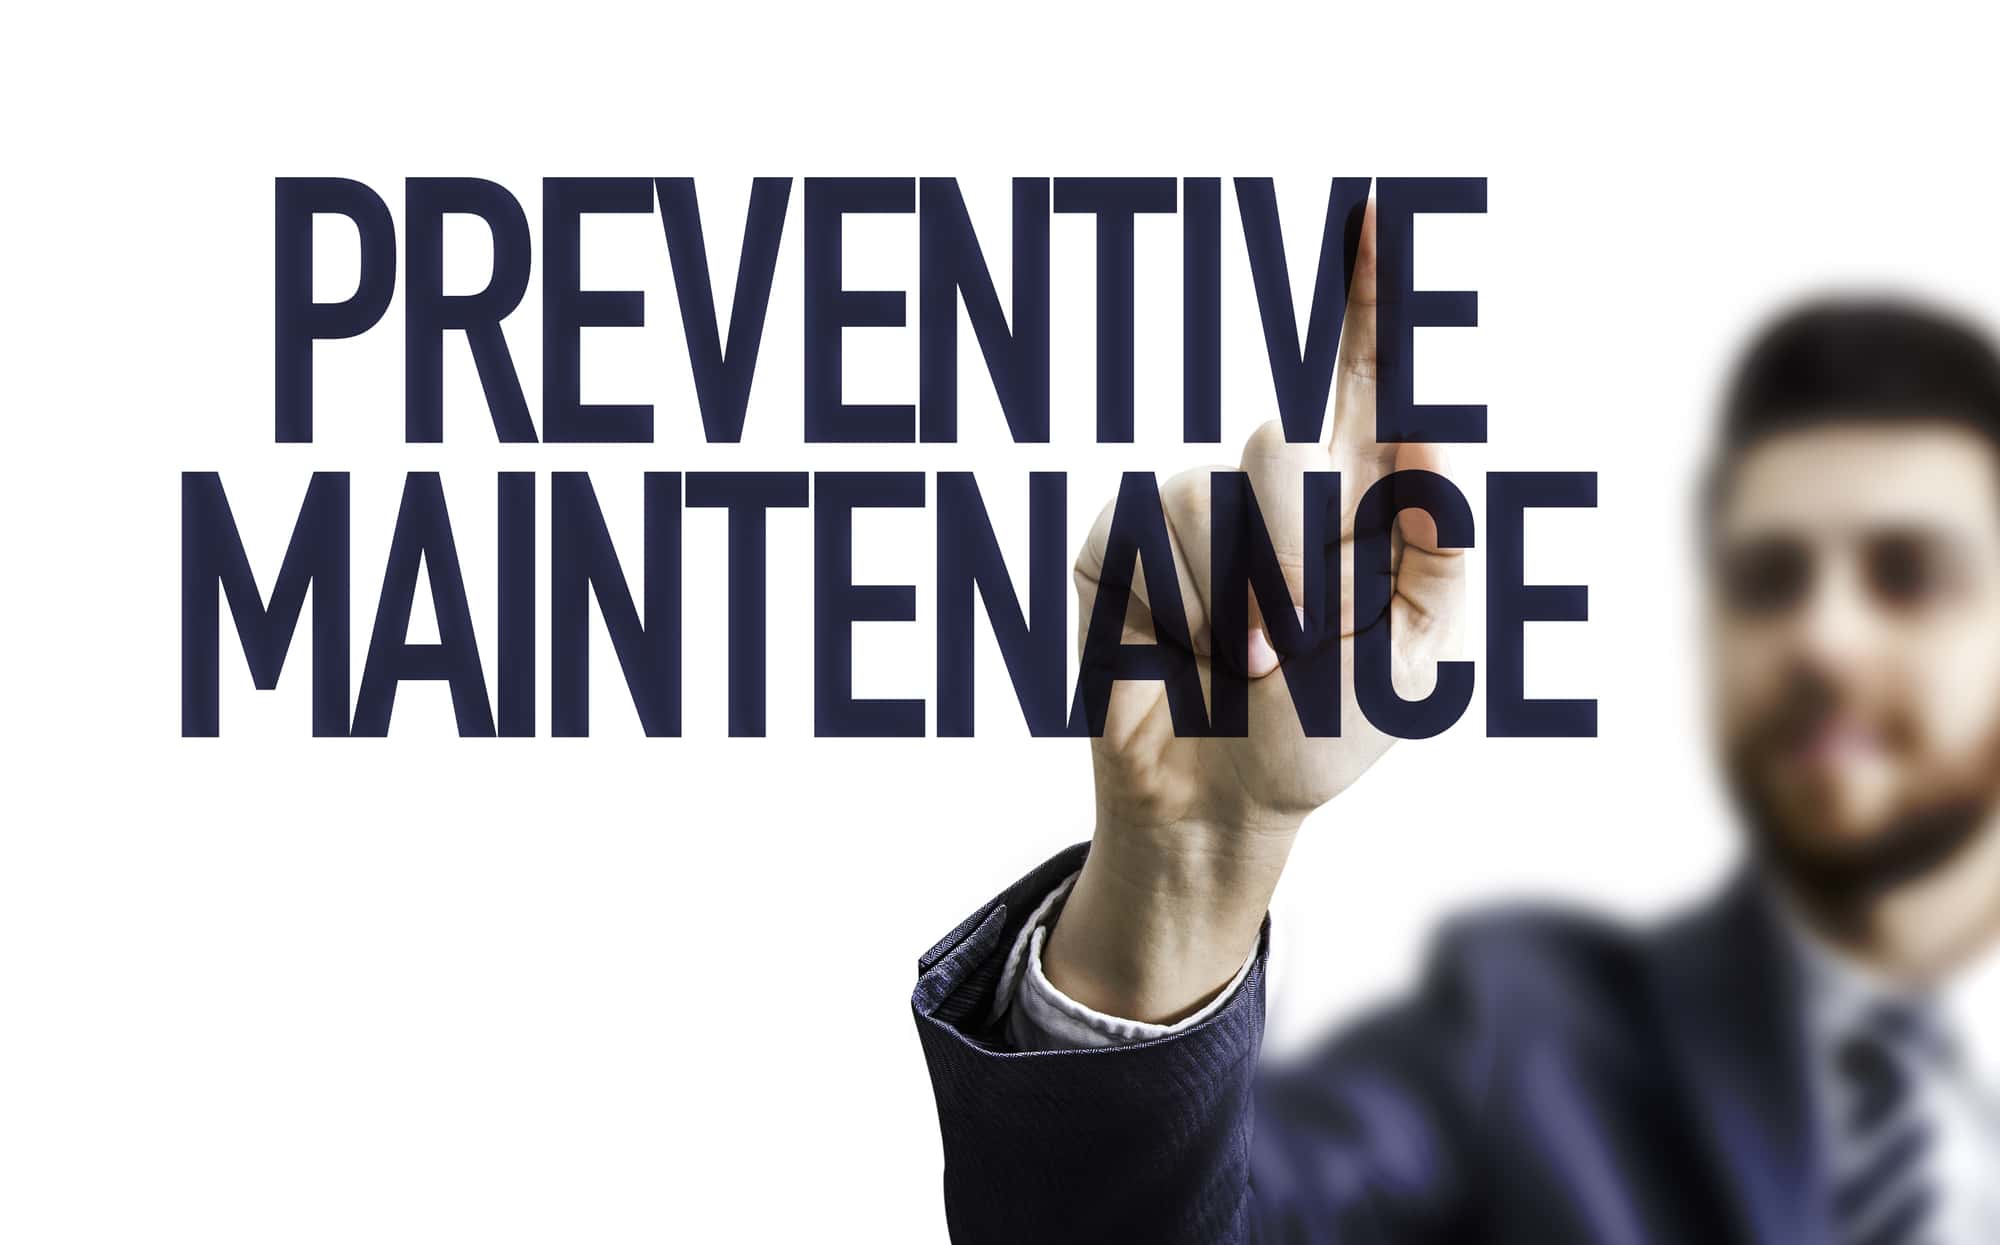 Business professional emphasizing the importance of preventive maintenance for business buildings.